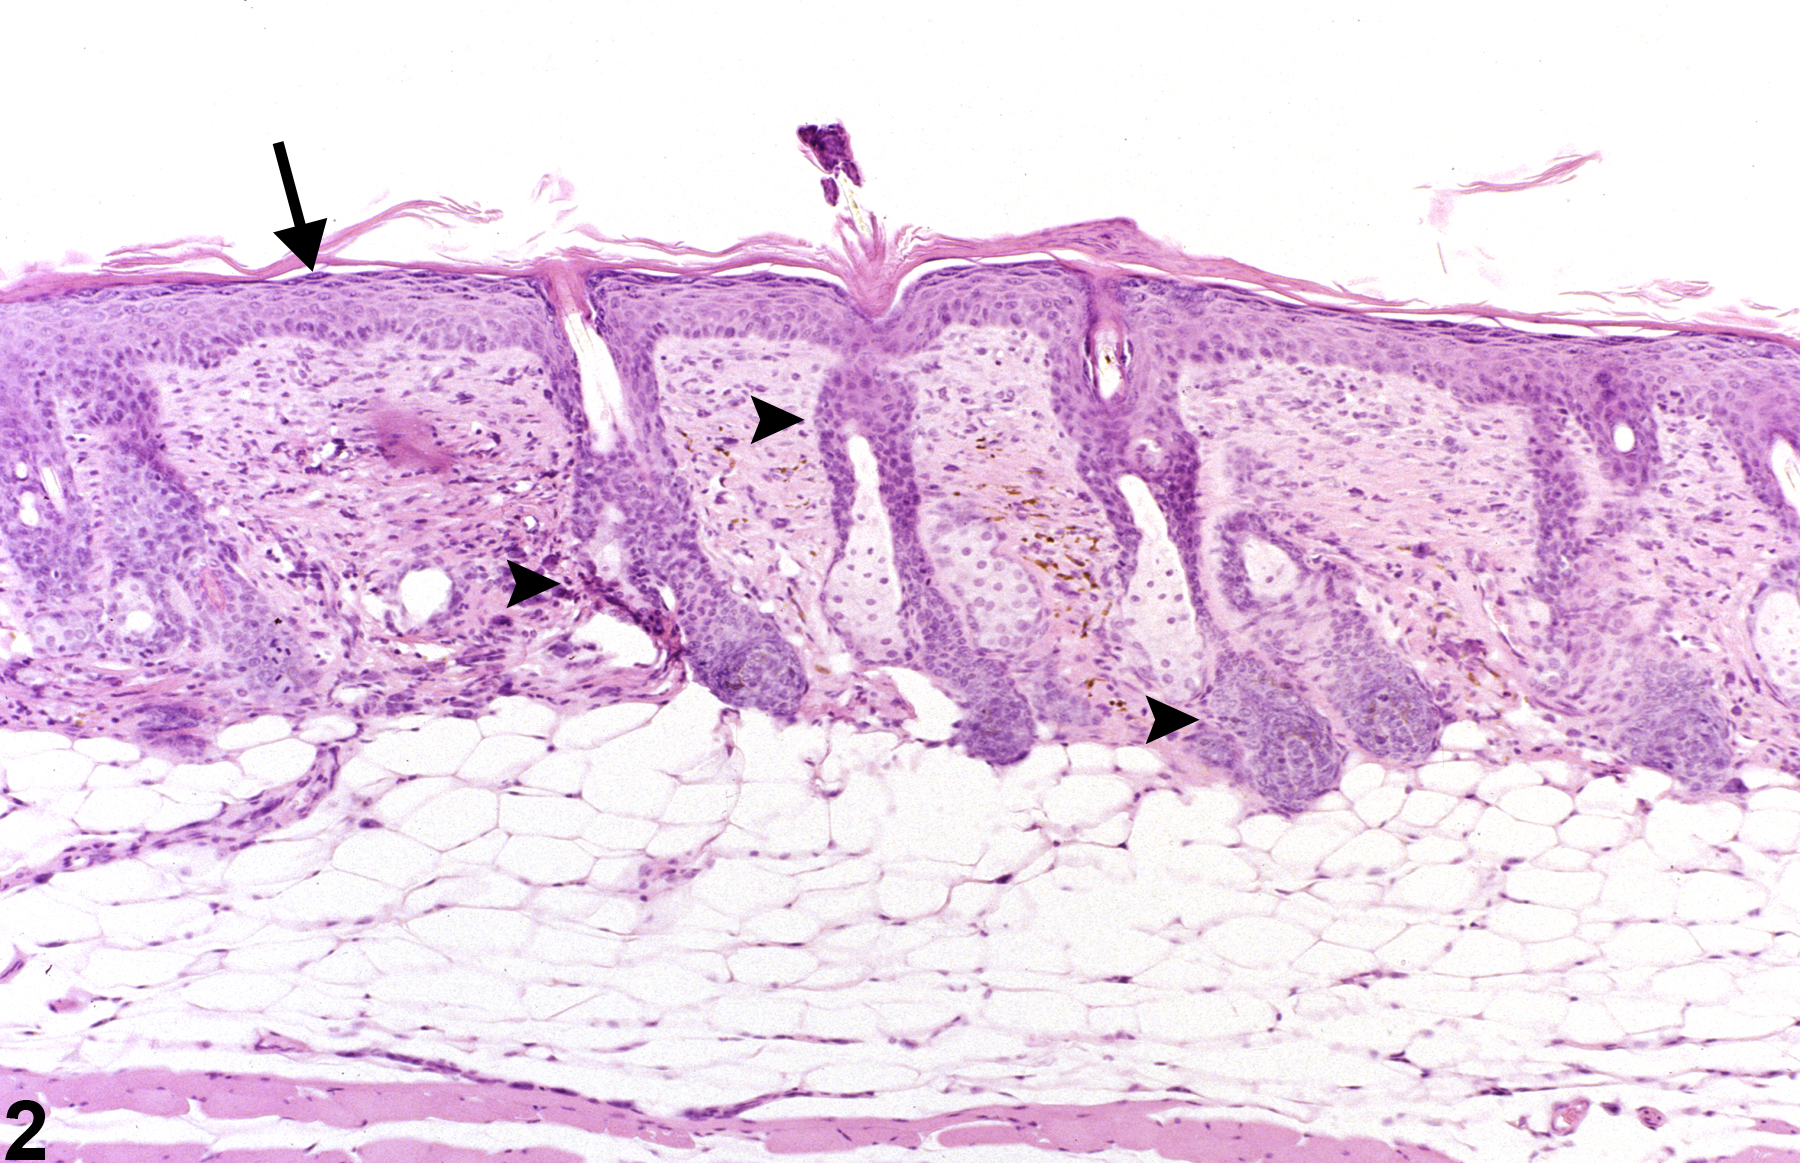 Image of Hyperplasia in the Skin from a Female B6C3F1 Mouse in a 90-day  Study